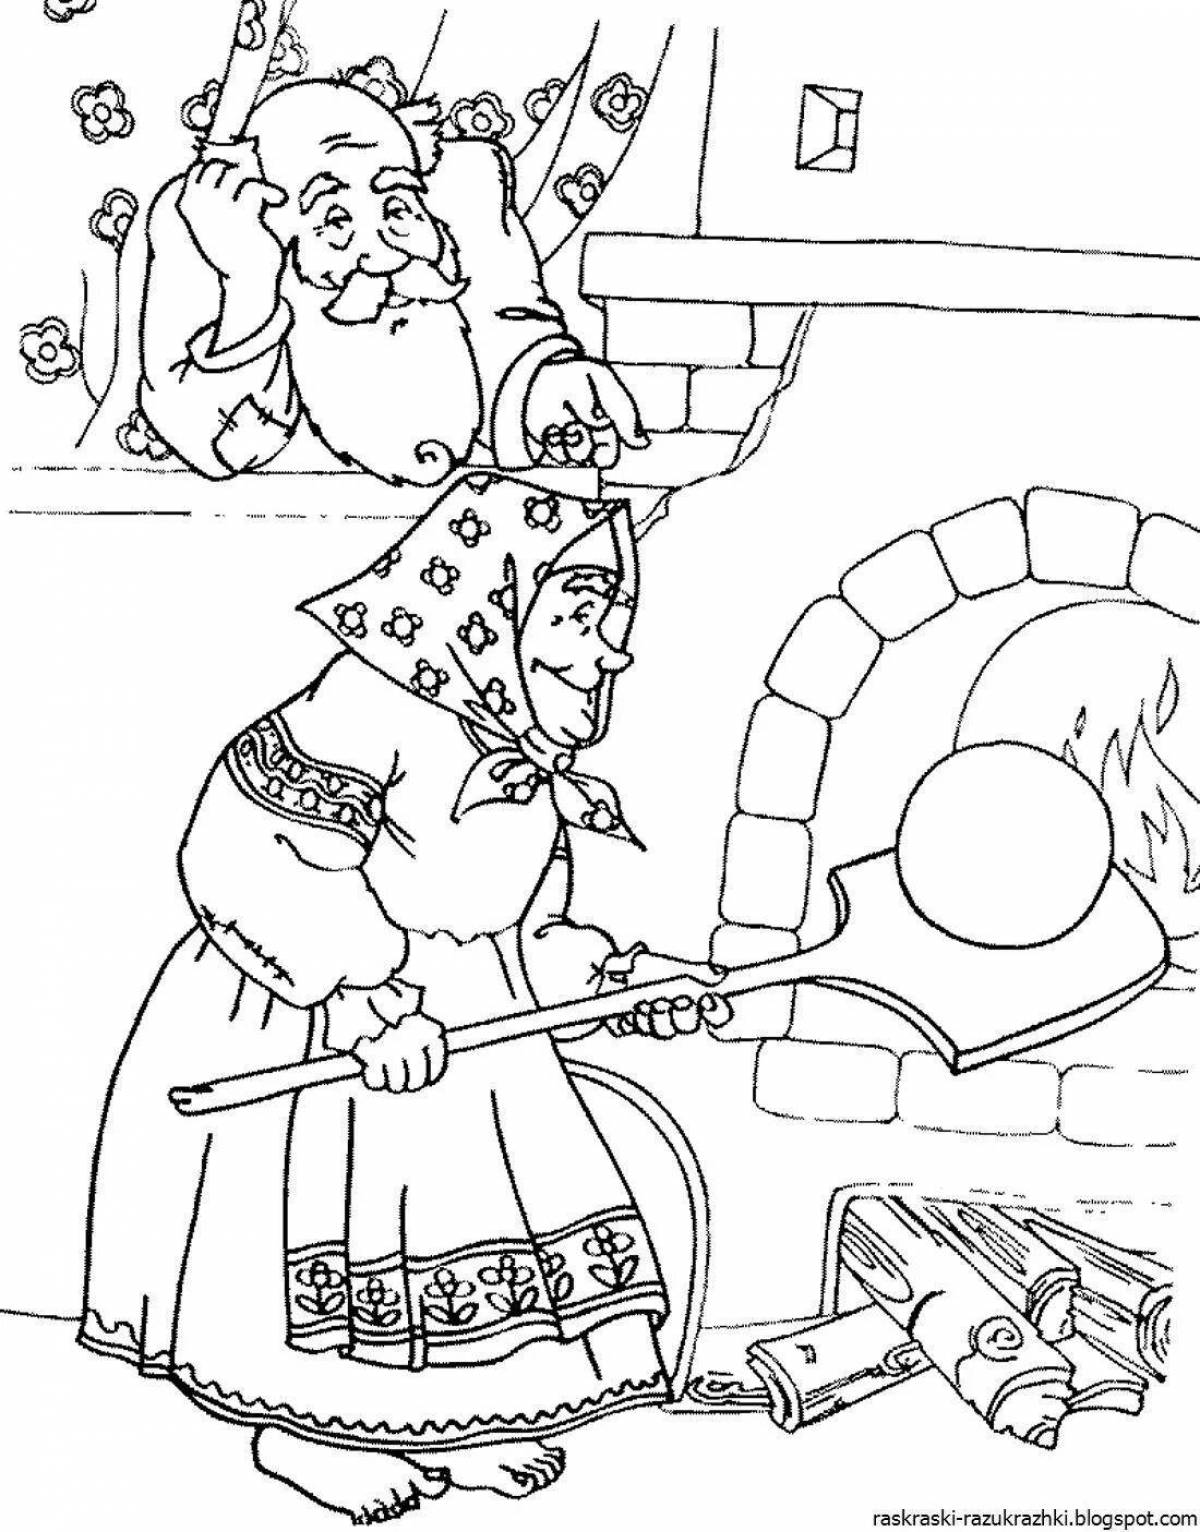 Brilliant coloring book based on Russian folk tales